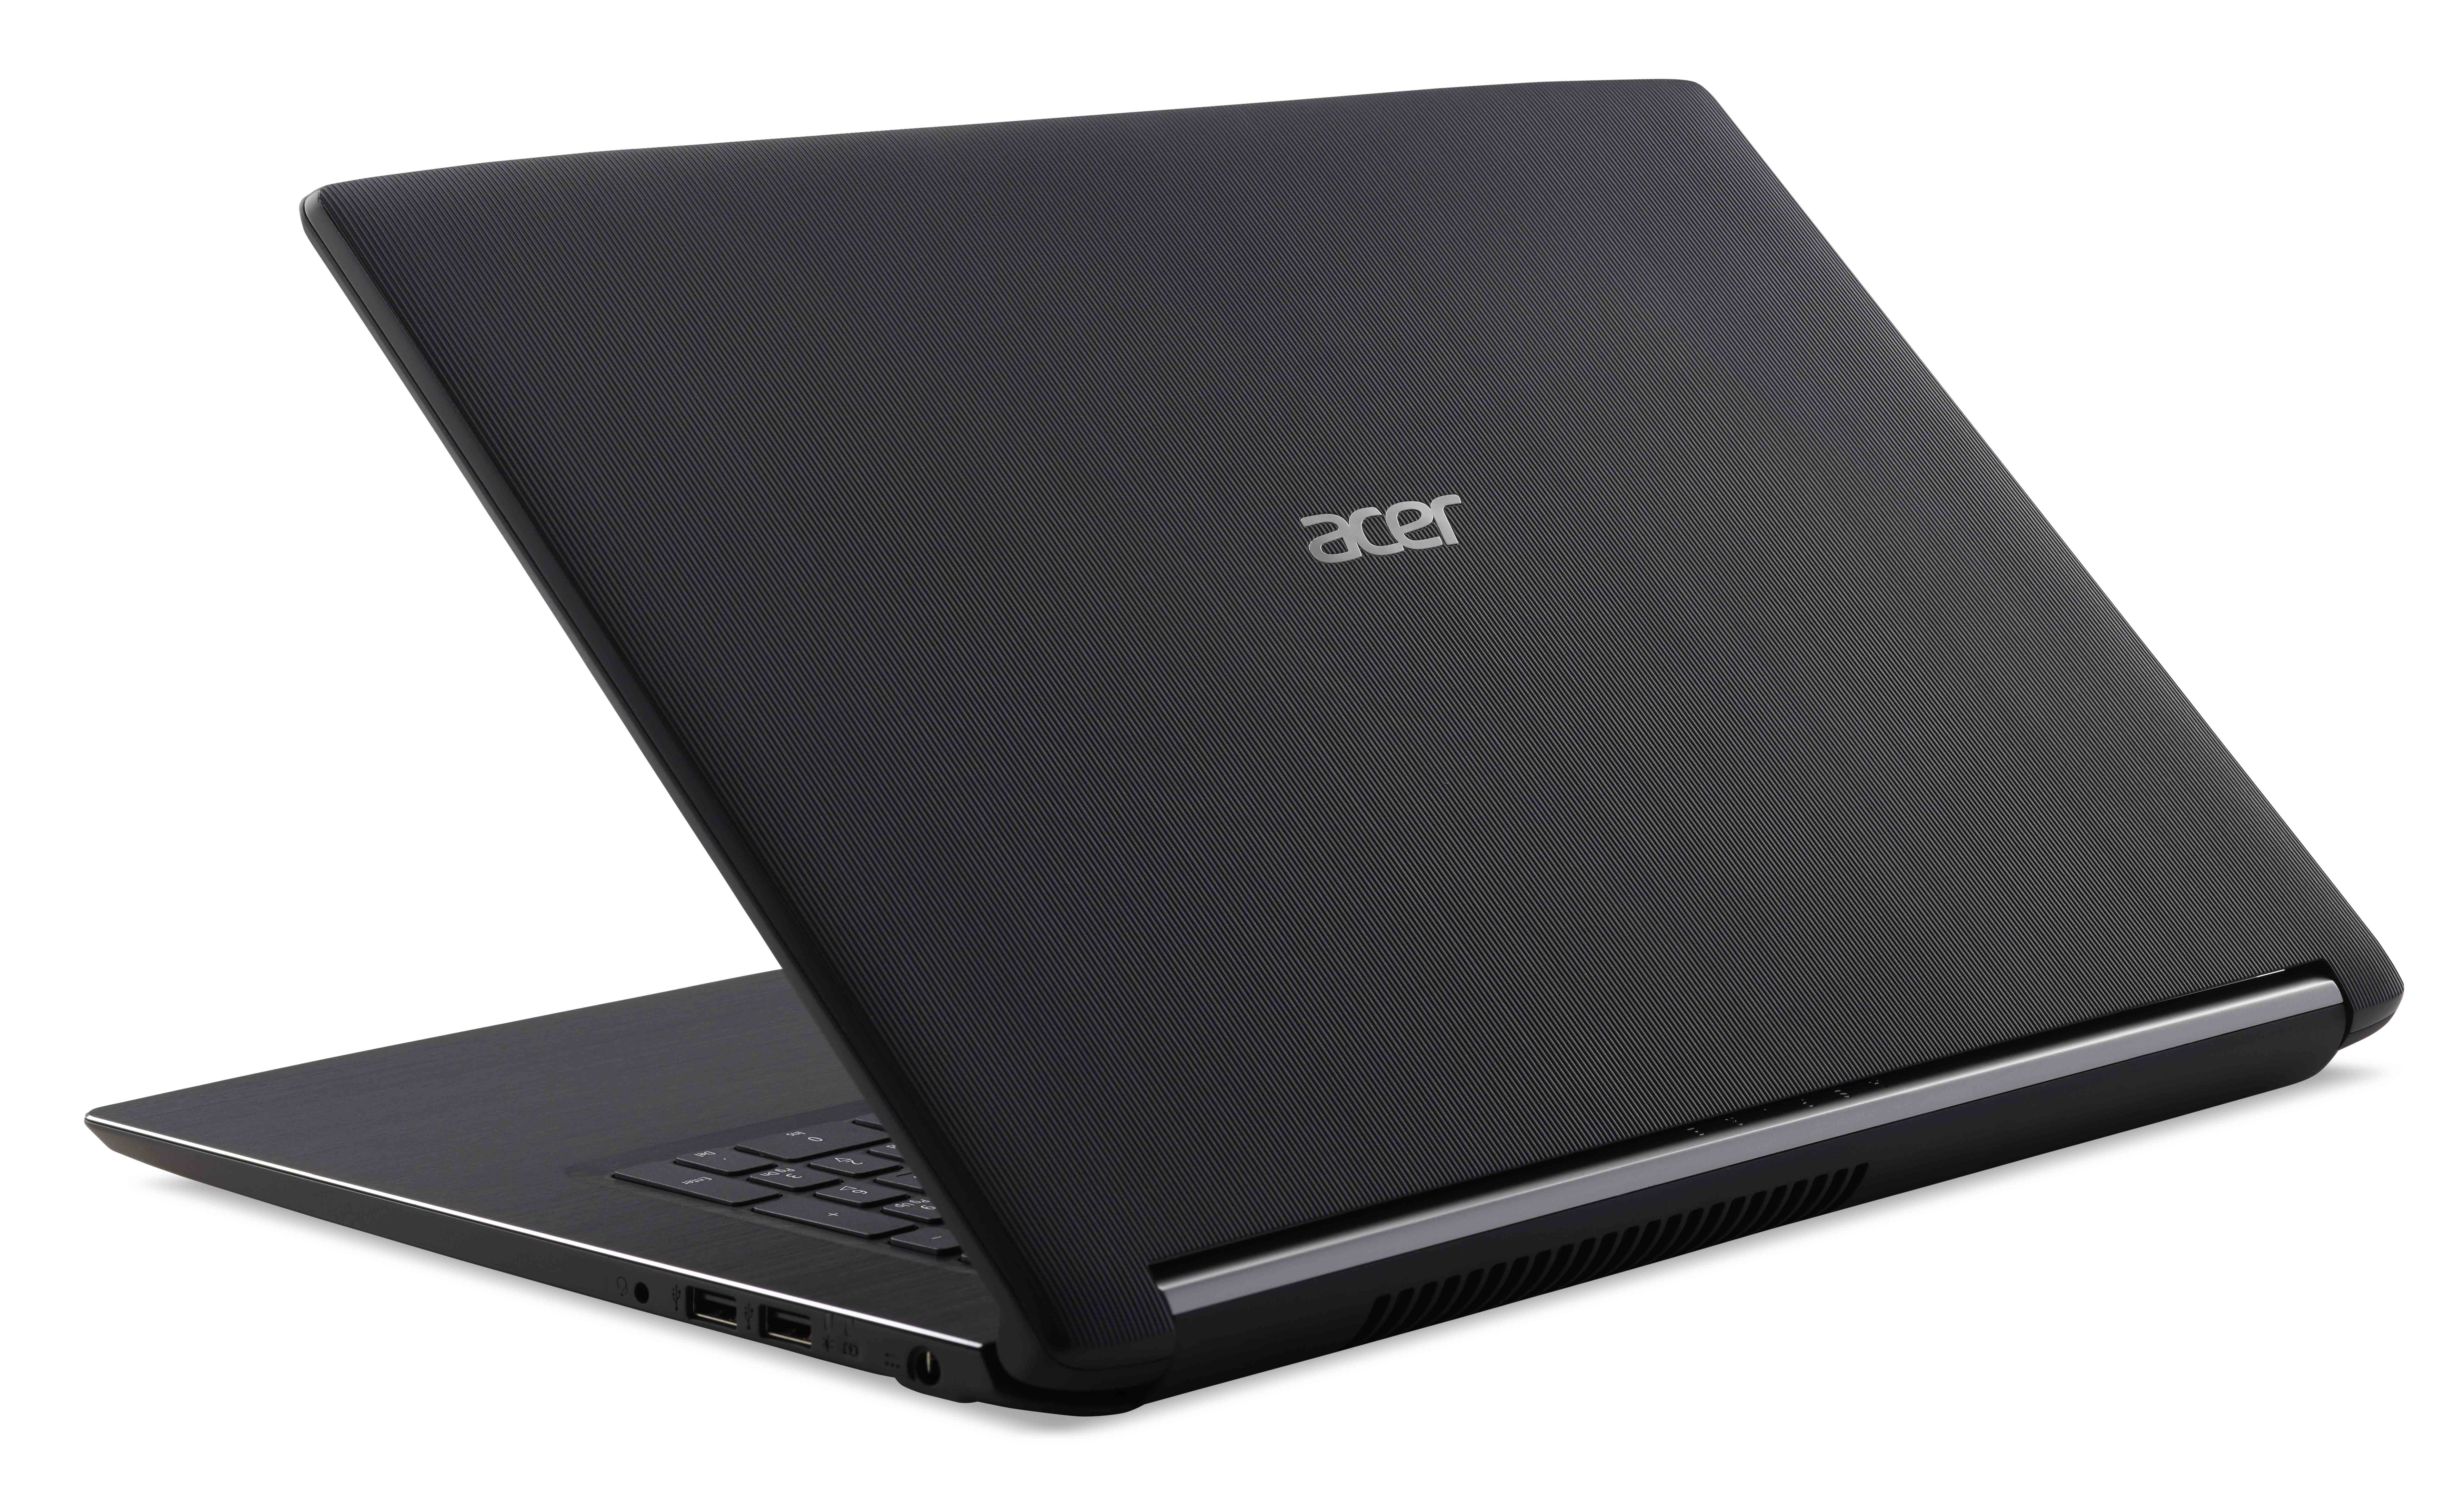 The Acer Aspire 7 with Windows 10